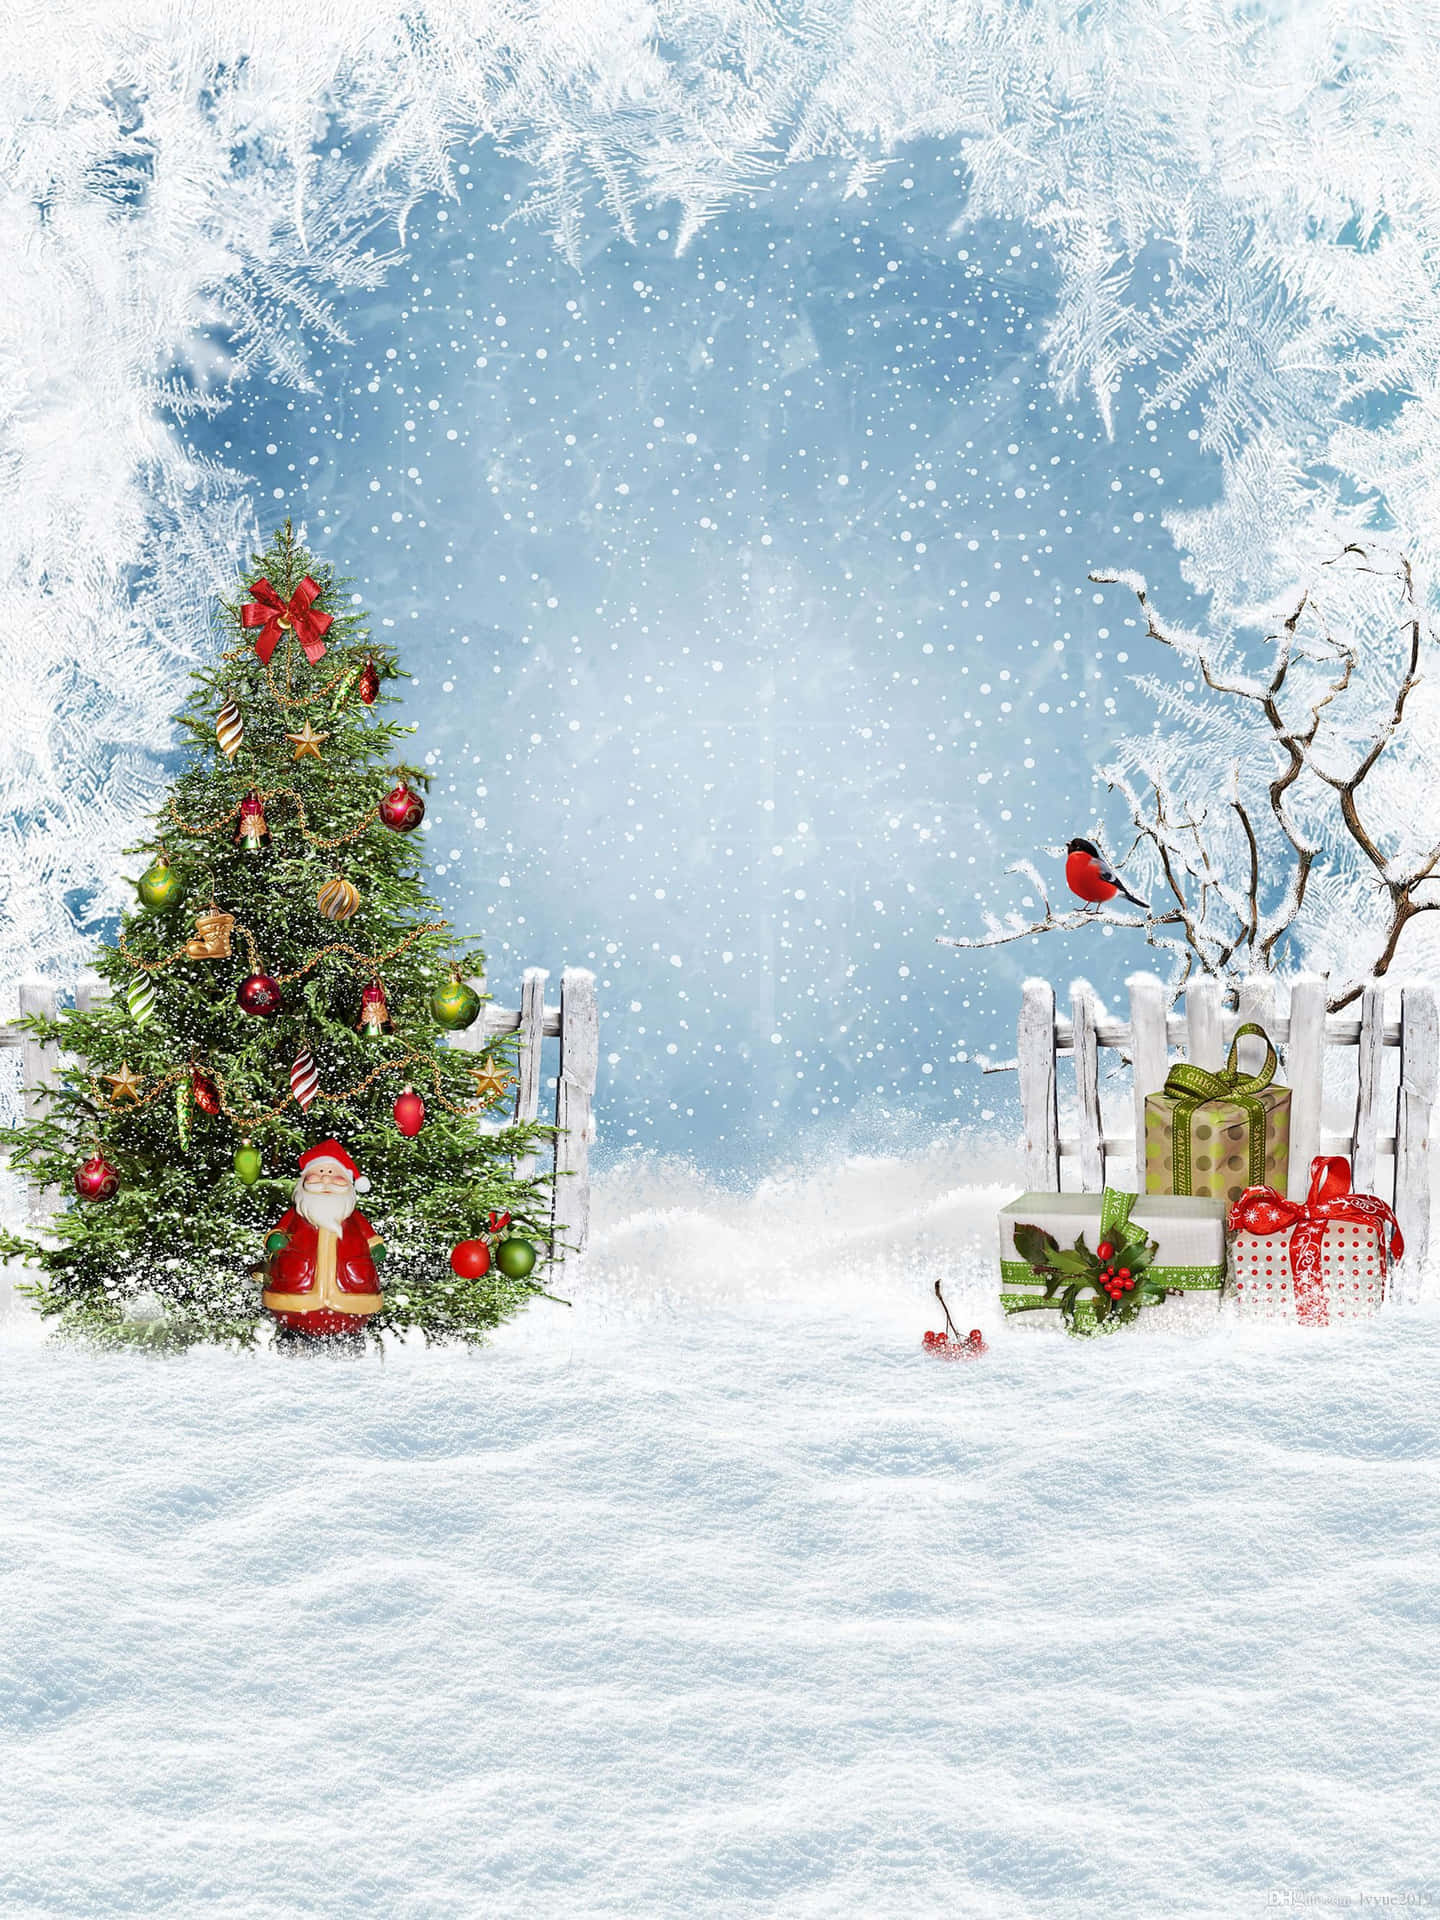 Gifts And Tree In Snow Christmas Background